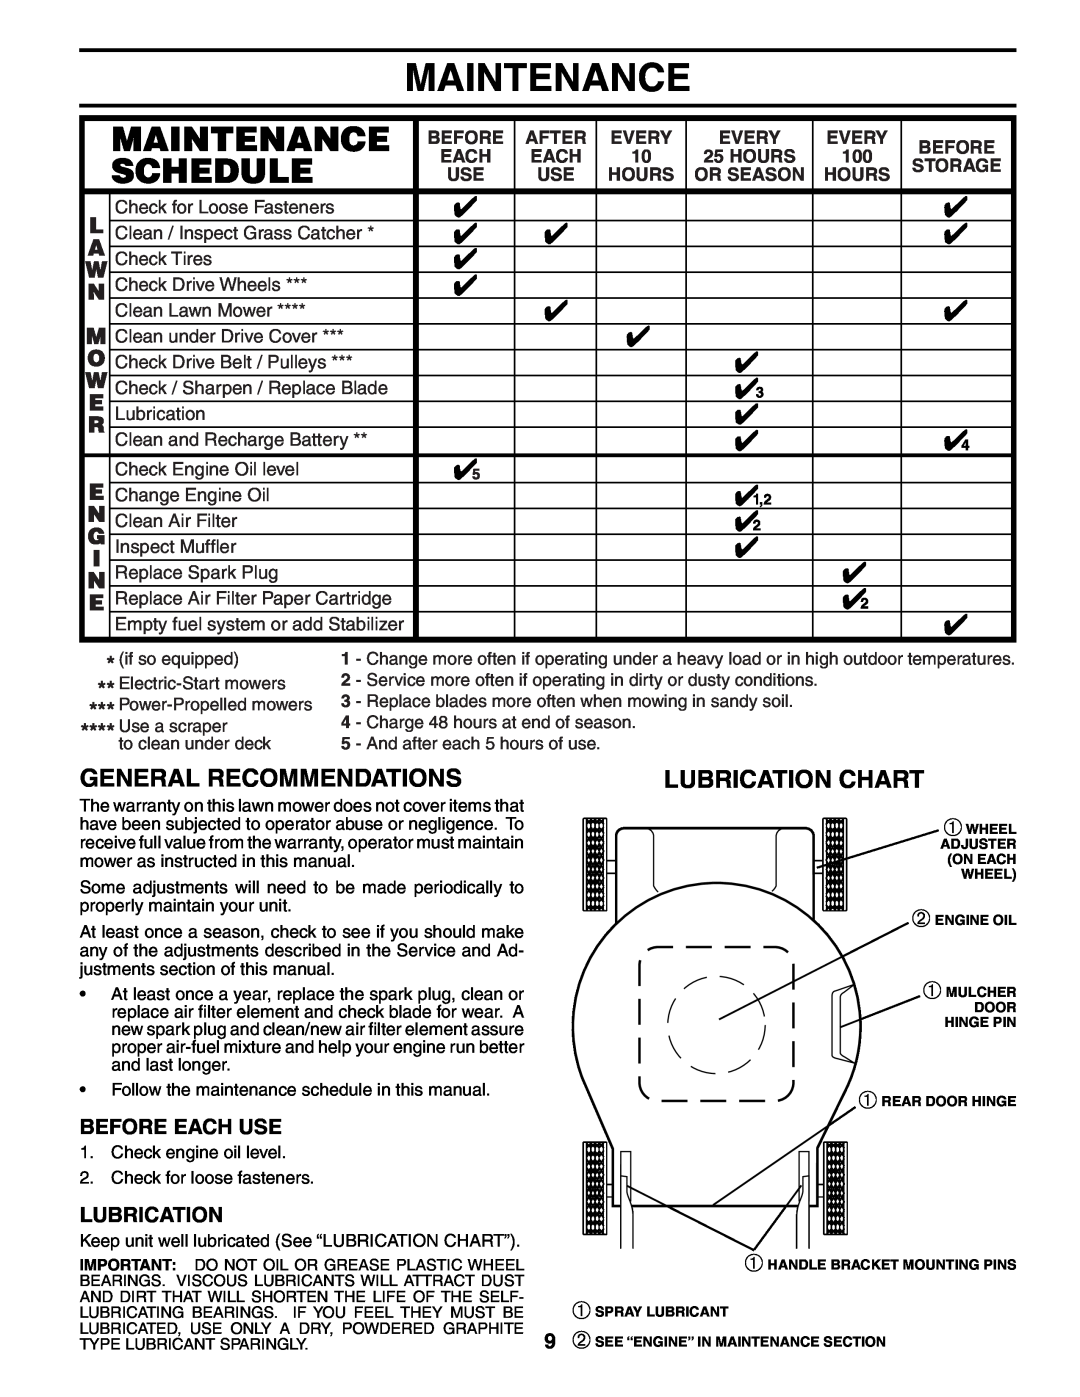 Husqvarna 6522SH Maintenance, General Recommendations, Lubrication Chart, Before Each Use, After, Every, Storage, Hours 